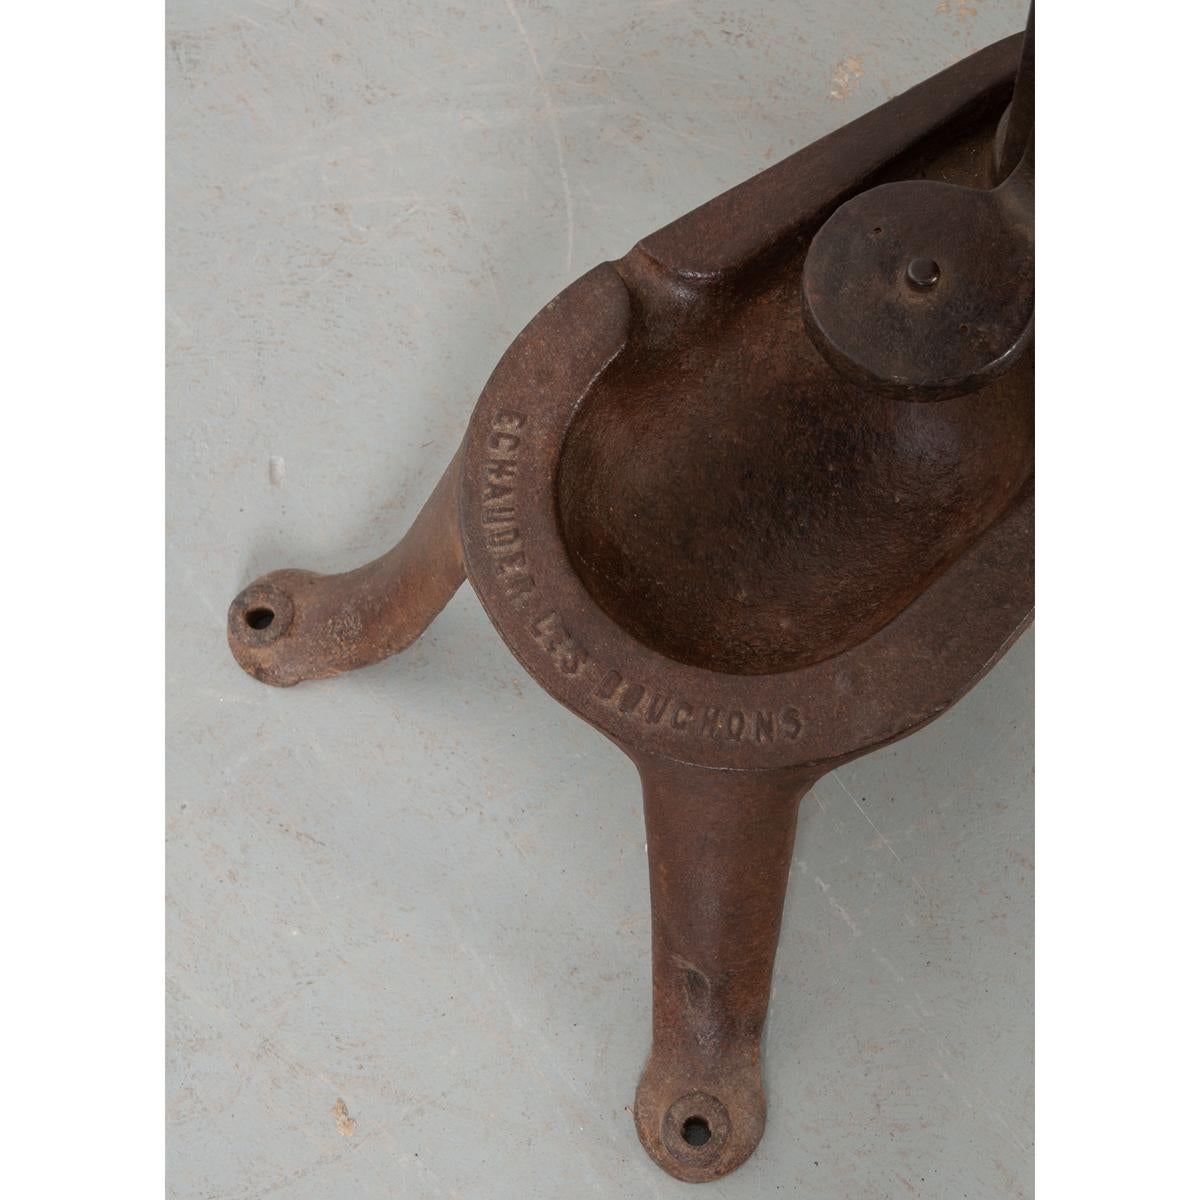 French Vintage Cast Iron Wine Bottle Corker In Good Condition For Sale In Baton Rouge, LA